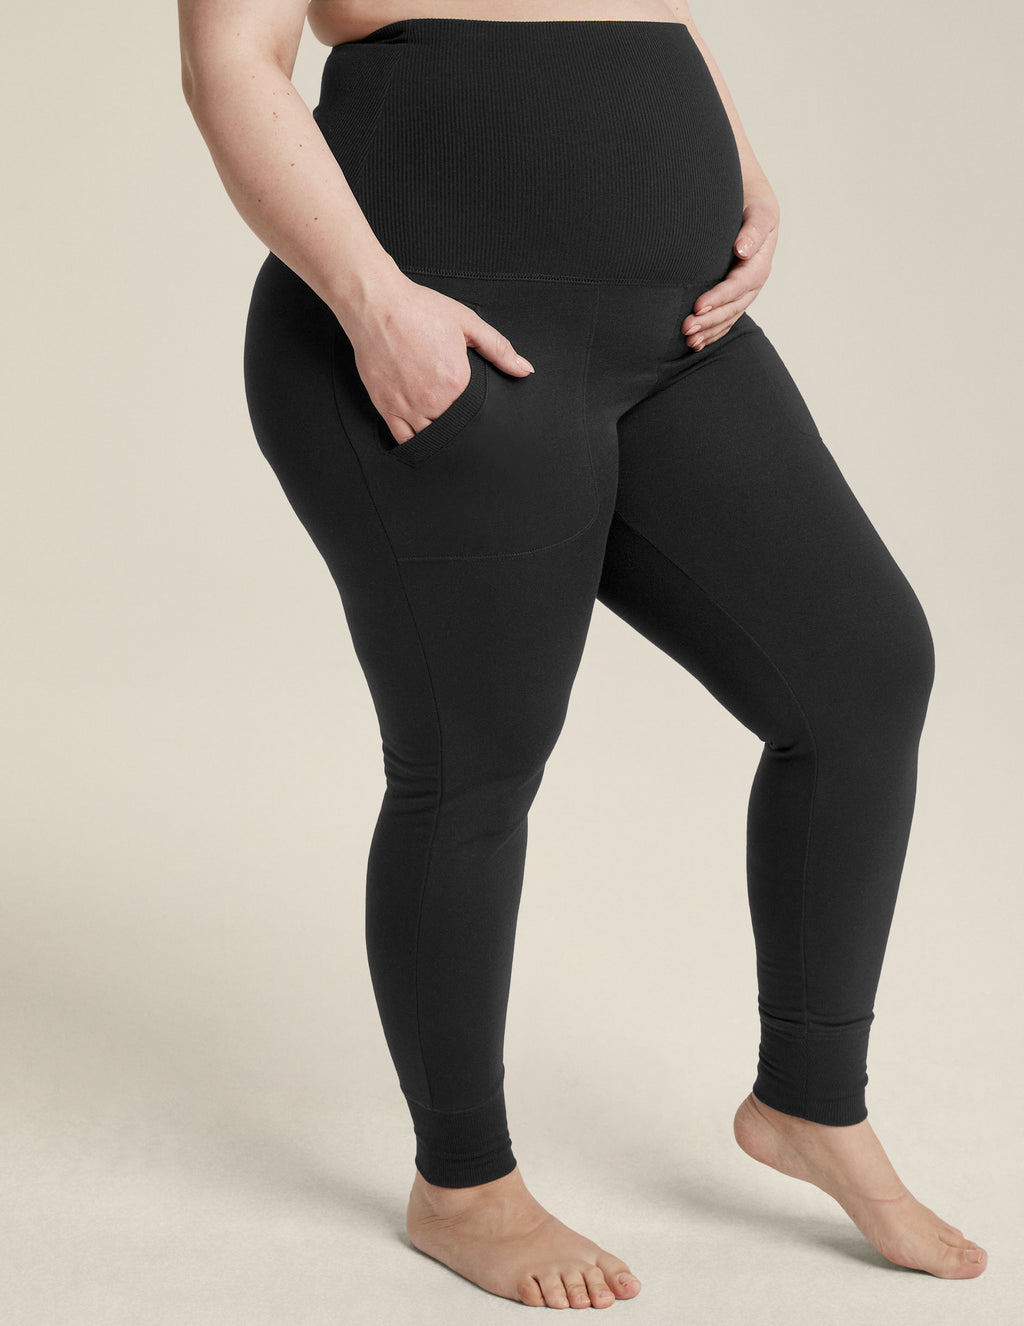 Cozy Fleece Grow Together Fold Over Maternity Sweatpants Featured Image